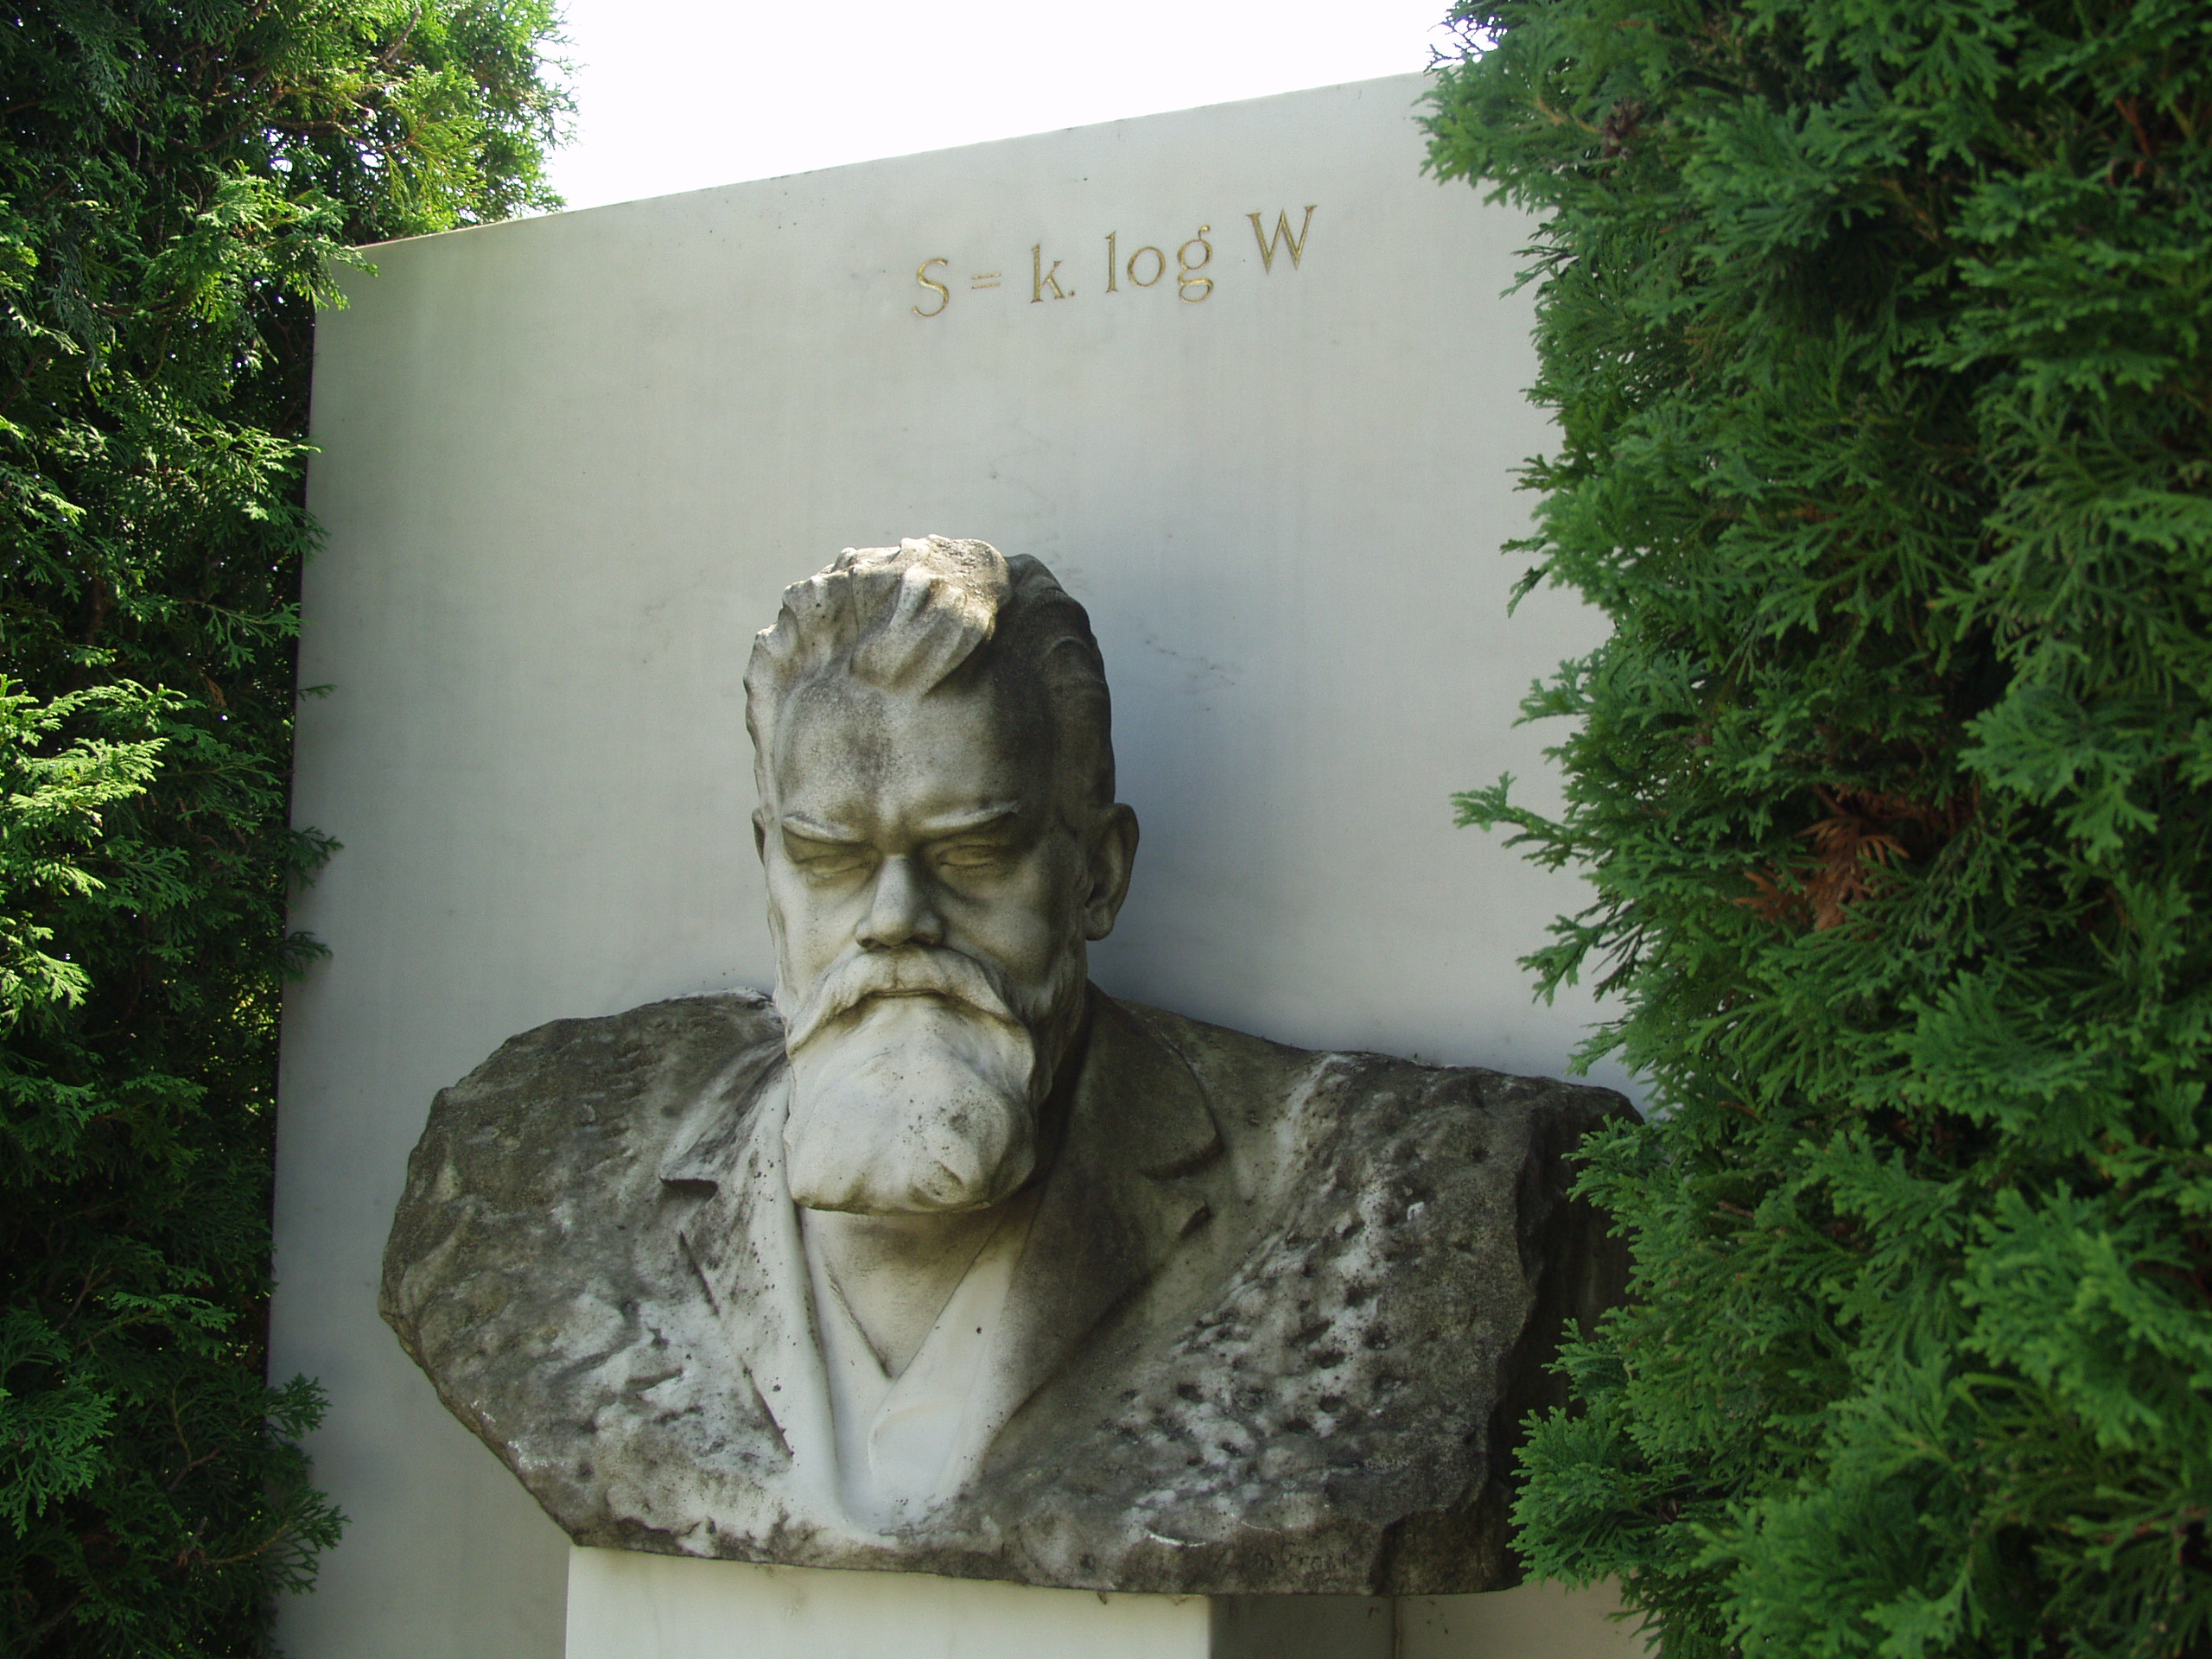 Vienna, Austria. Boltzmann's Tomb in the Zentralfriedhof (Central Cemetary). The Tomb is in Gruppe 14 C Grab No 1 (group 14 grave number 1). Photos by Tom Schneider or of him by Gerd Muller. 2002 July 14. This image: bust of Boltzmann. <a href = 